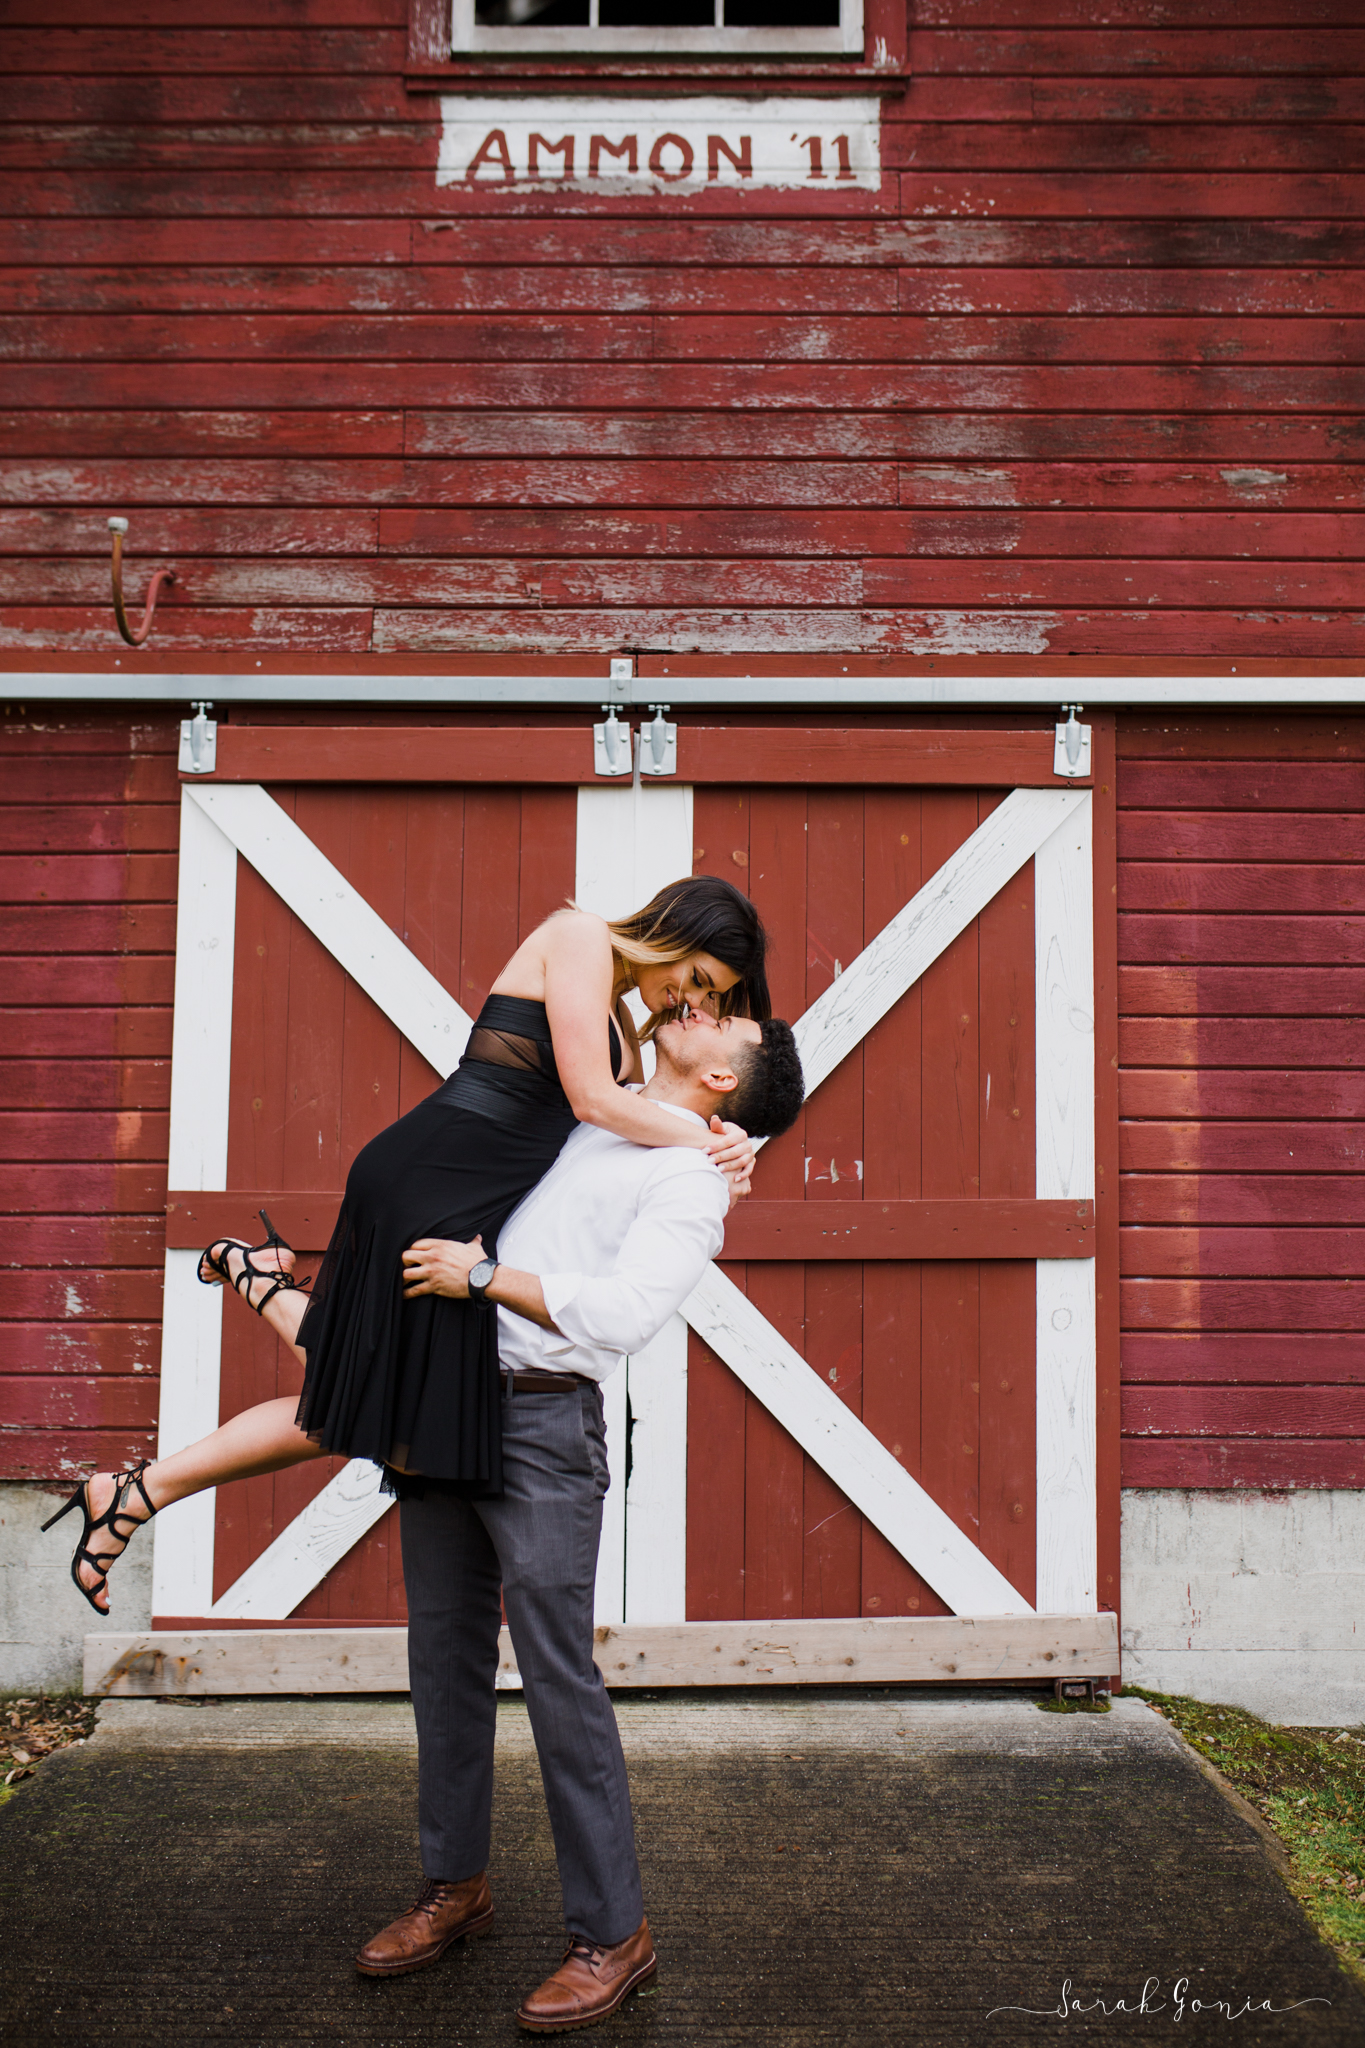 Olympia Photographer Engagement, Love Stories and Weddings Romantic